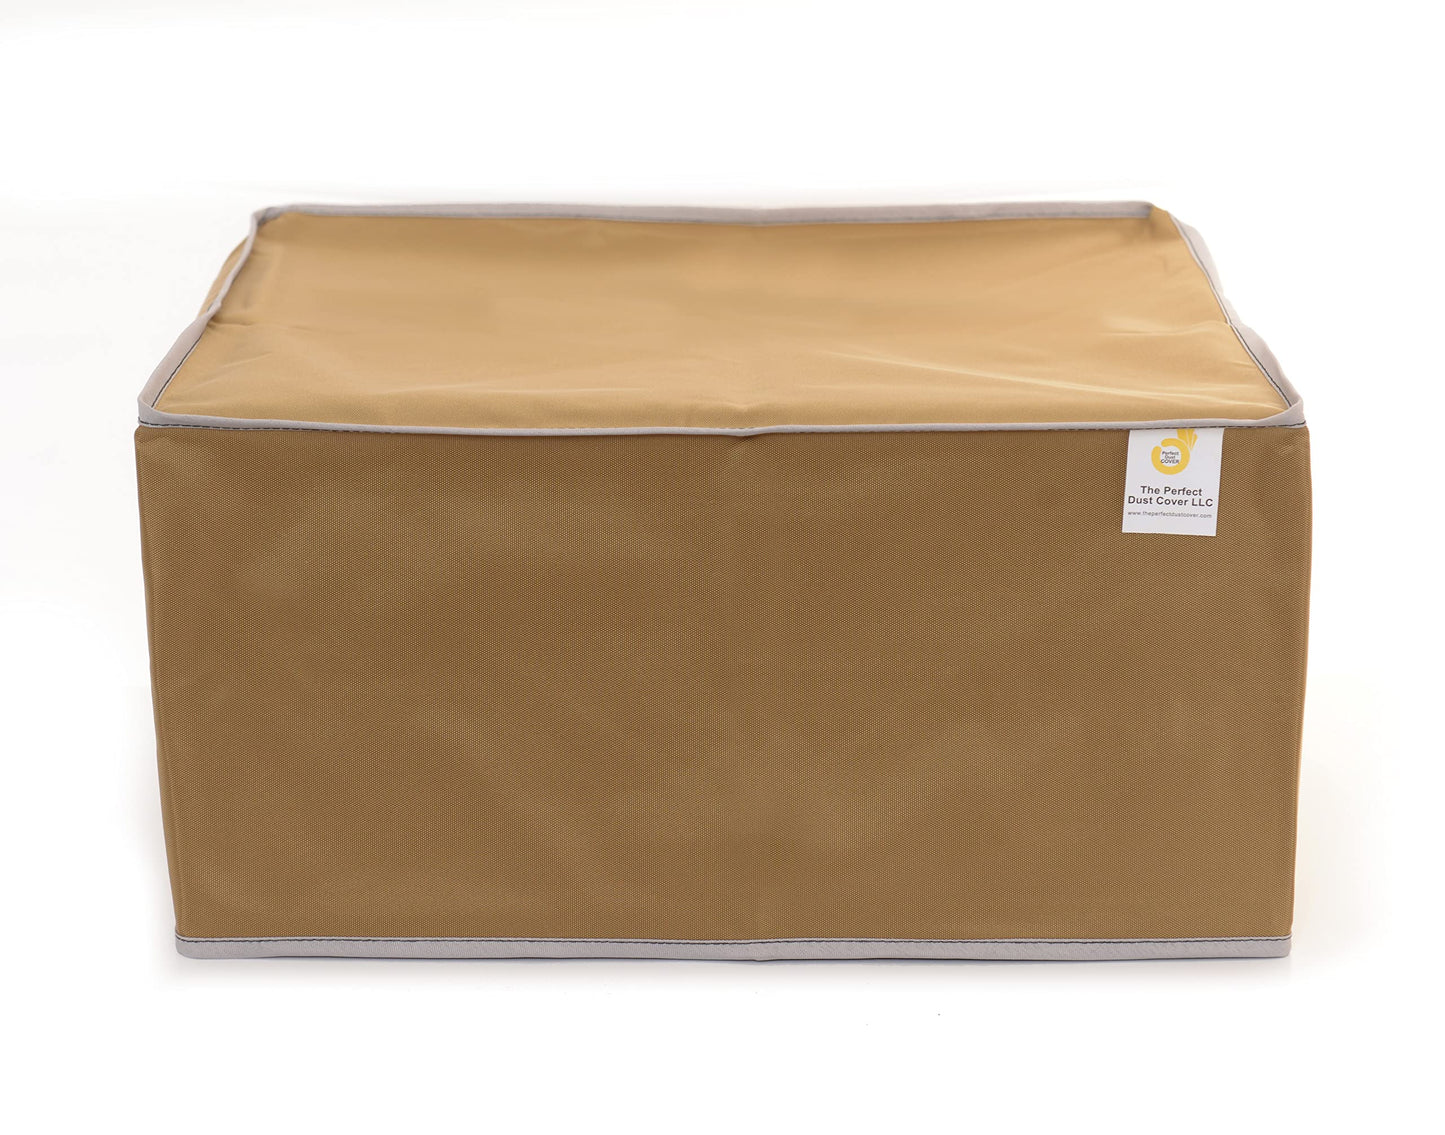 The Perfect Dust Cover, Tan Nylon Cover for HP OfficeJet Pro 9015 All-in-One Wireless Printer, Anti Static Waterproof Cover Dimensions 17.3''W x 13.5''D x 10.9''H by The Perfect Dust Cover